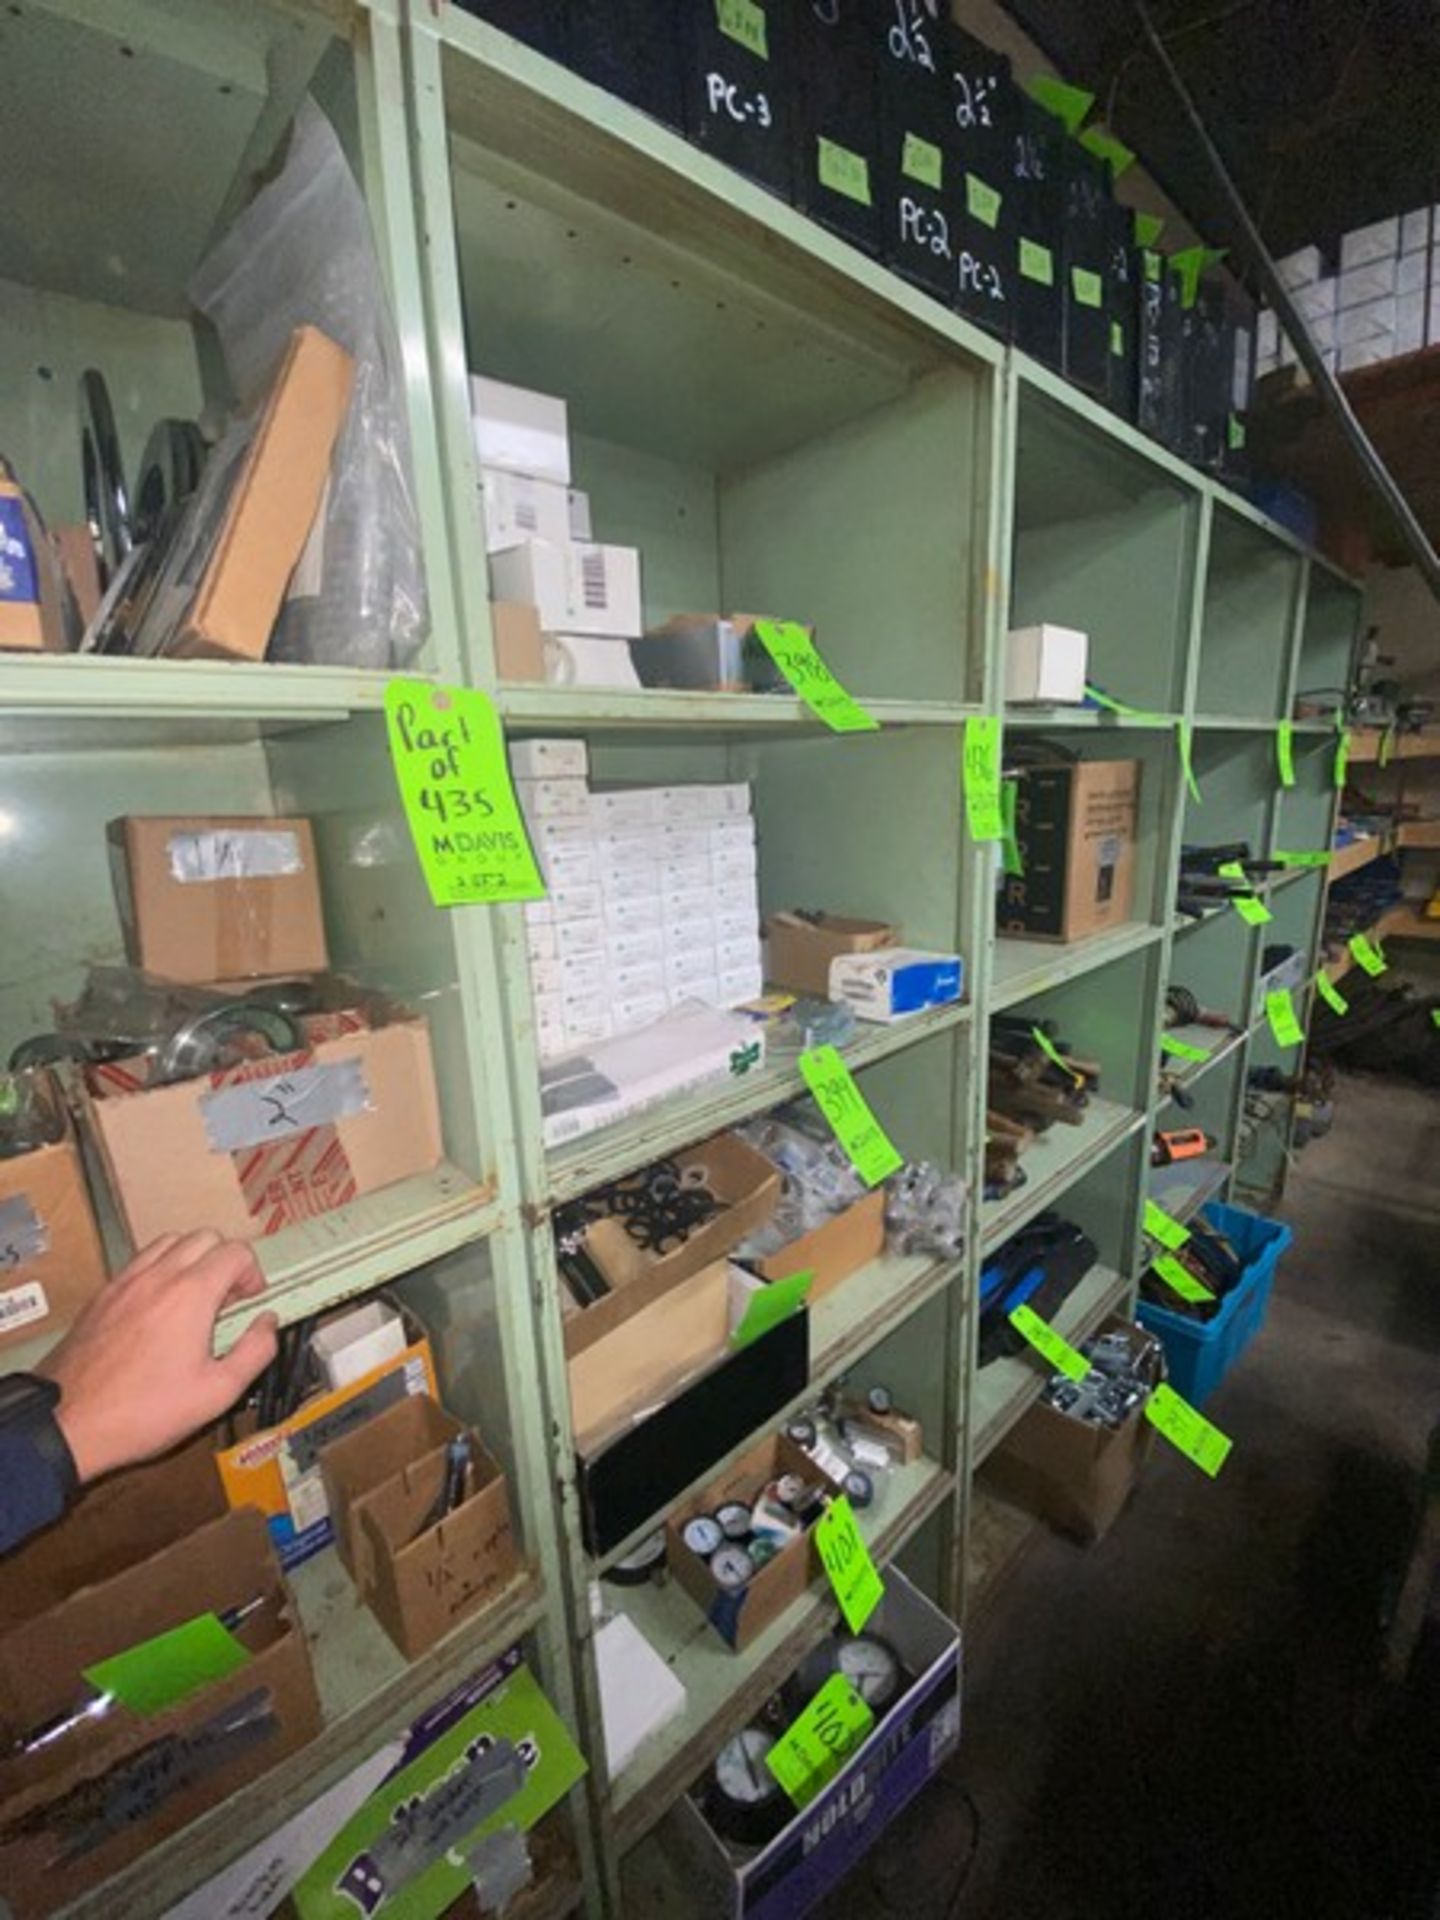 (2) 5-Shelf Shelving Unit, Overall Dims.: Aprox. 29” L x 20” W x 82” H (LOCATED IN MONROEVILLE,